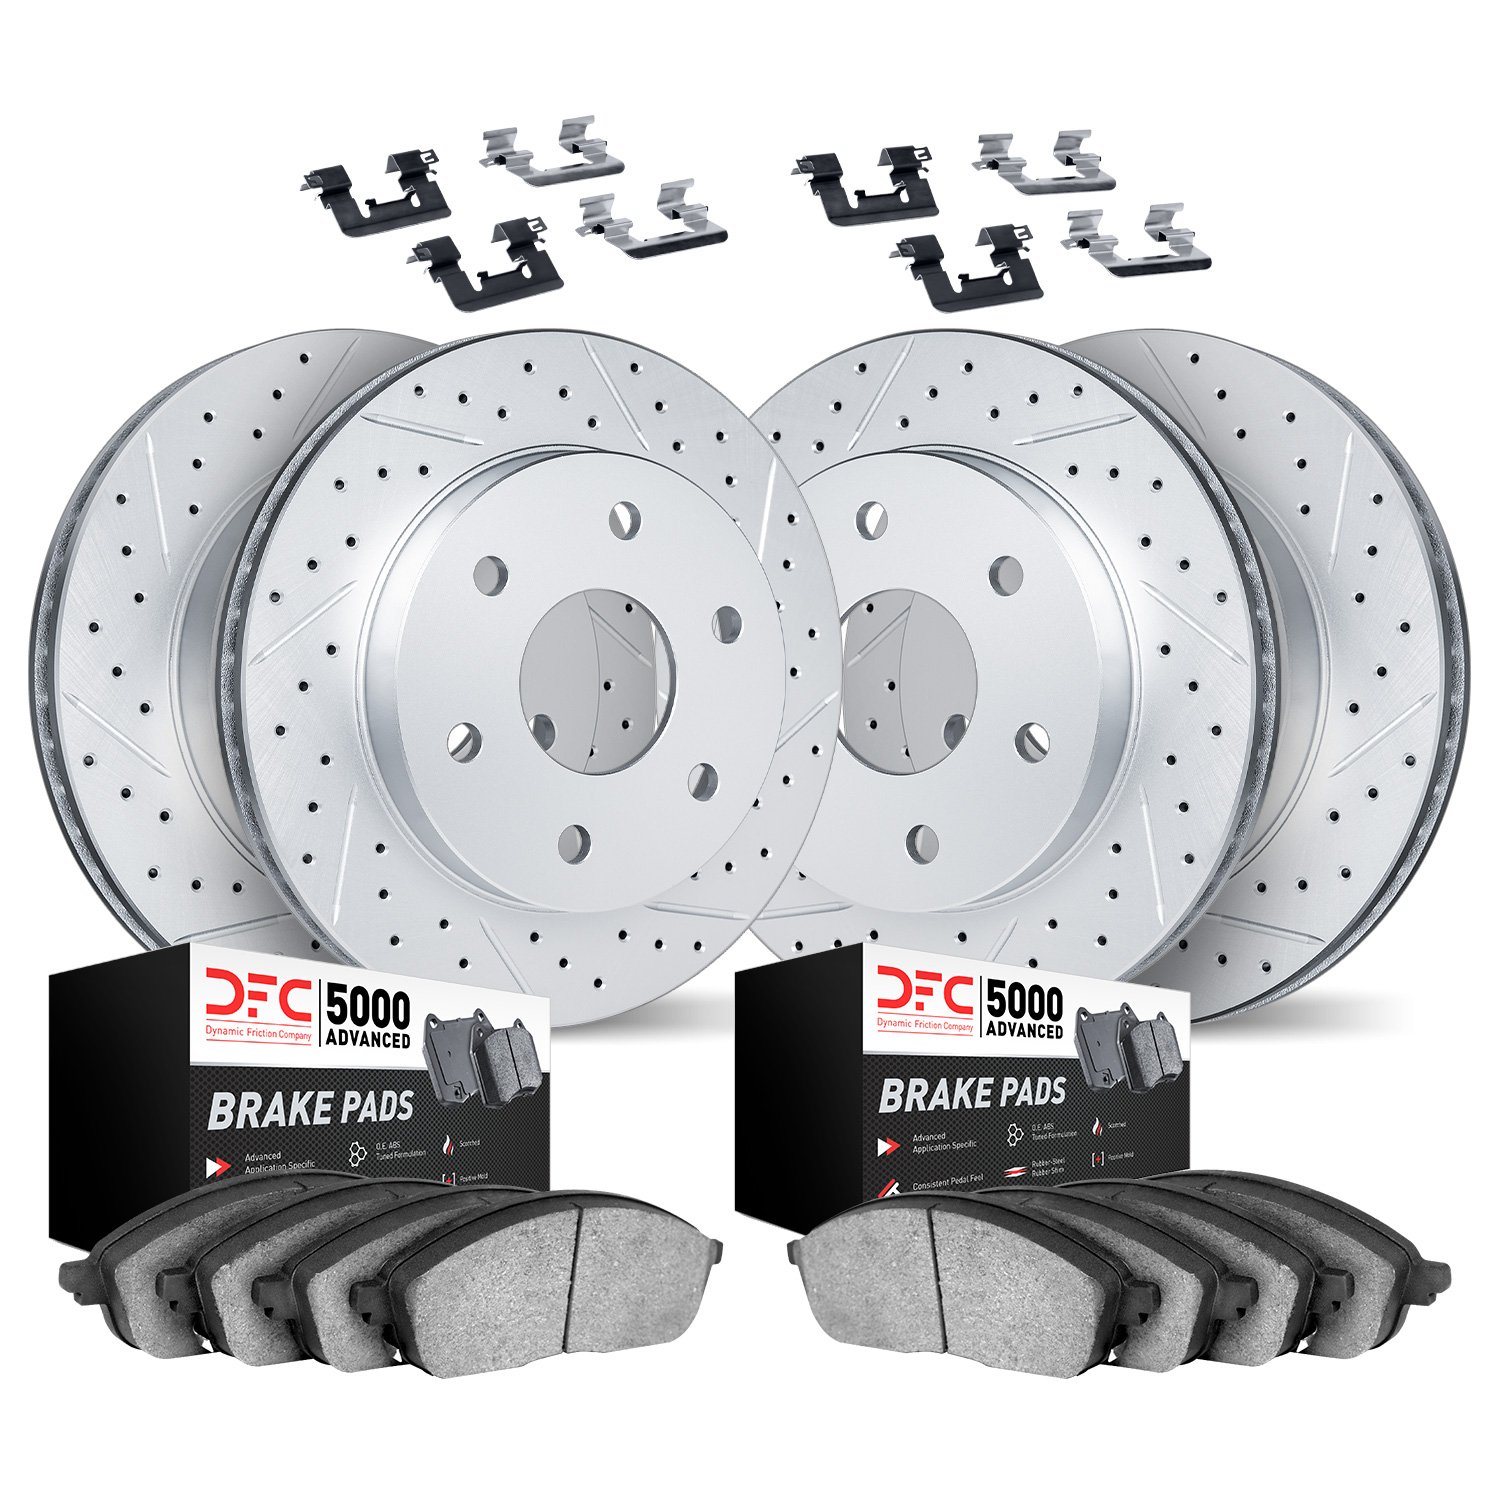 2514-46026 Geoperformance Drilled/Slotted Rotors w/5000 Advanced Brake Pads Kit & Hardware, 2013-2019 GM, Position: Front and Re